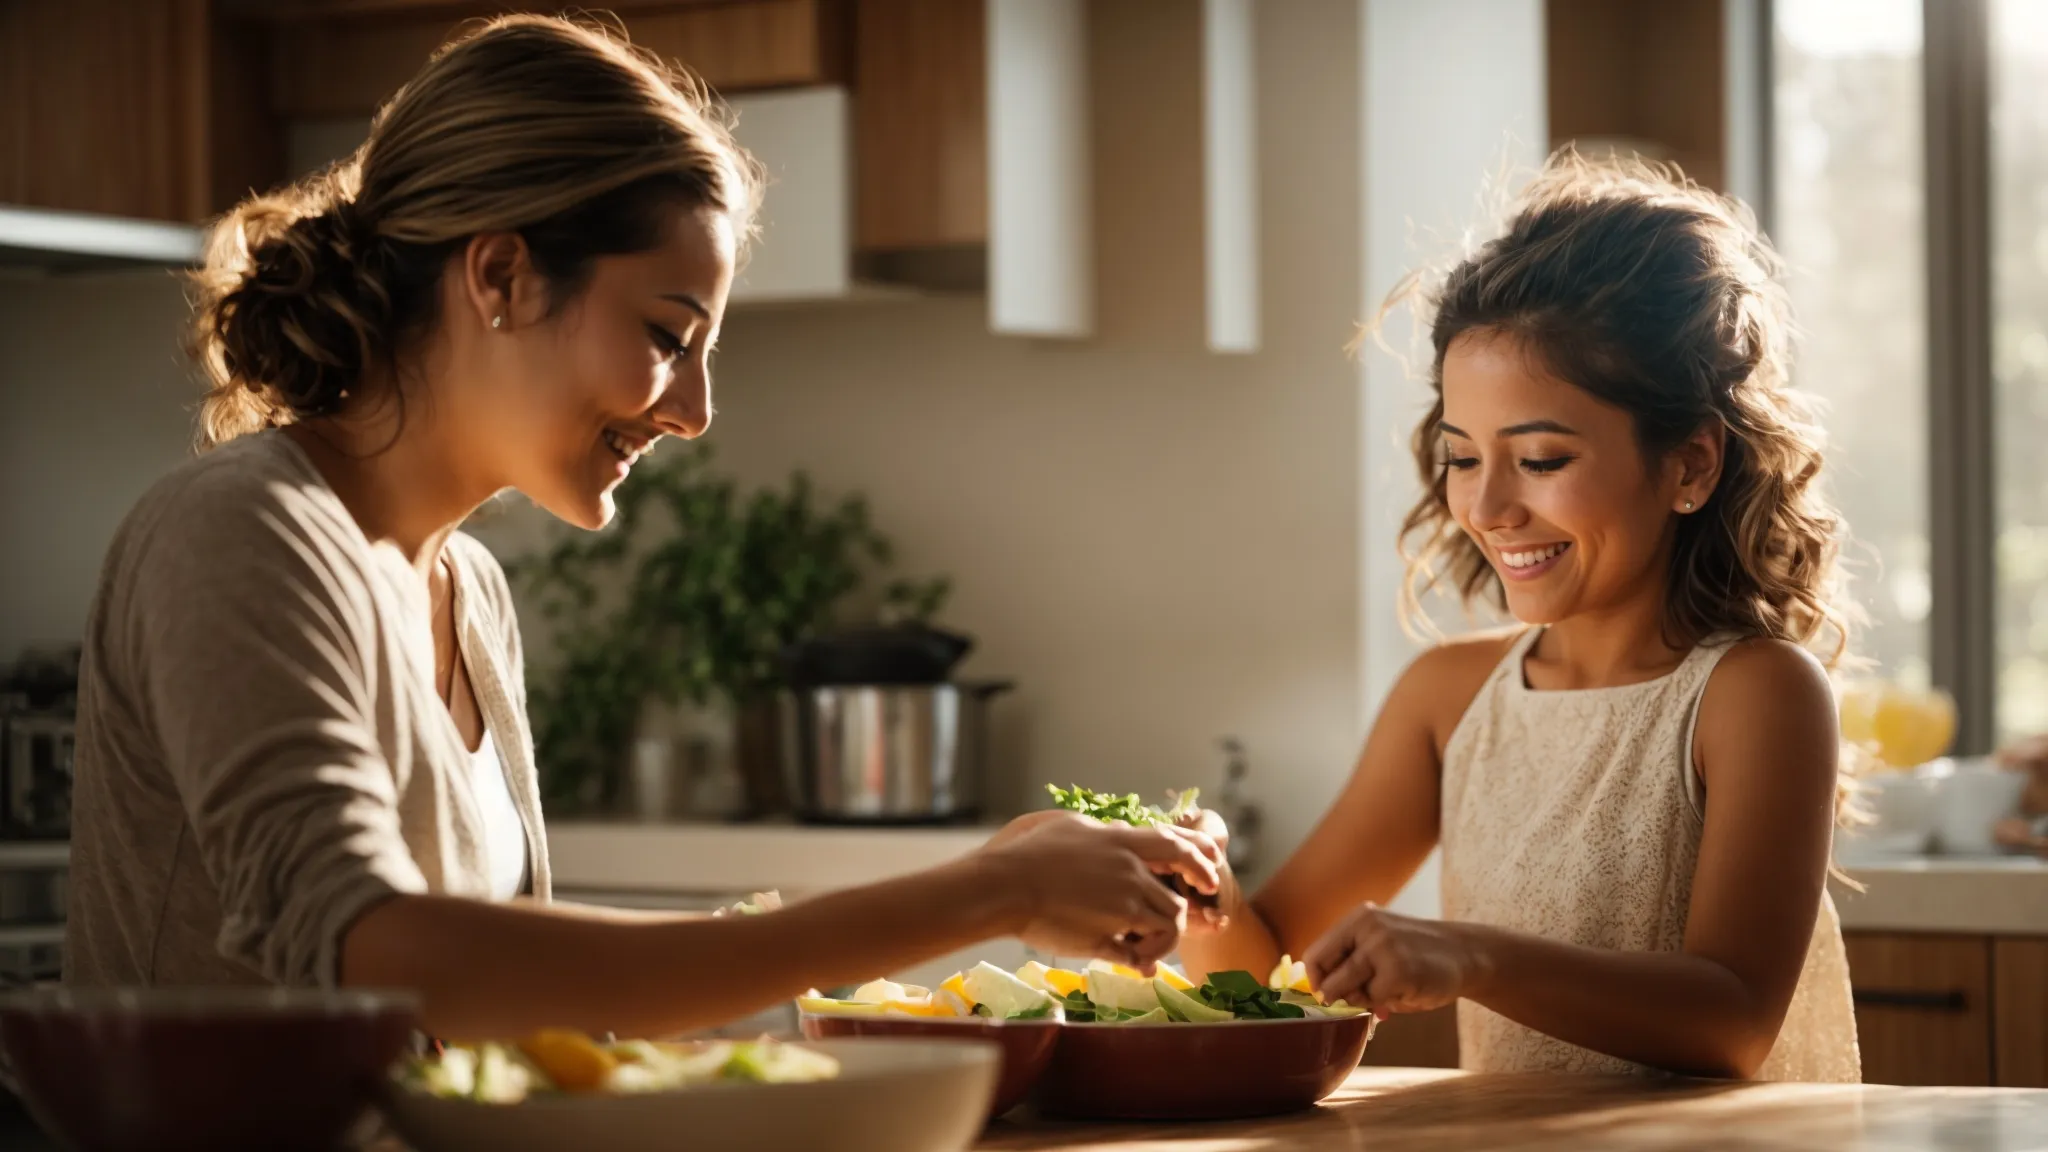 a mother and daughter, both with genuine smiles, are seen preparing a healthy meal together in a sunlit kitchen.